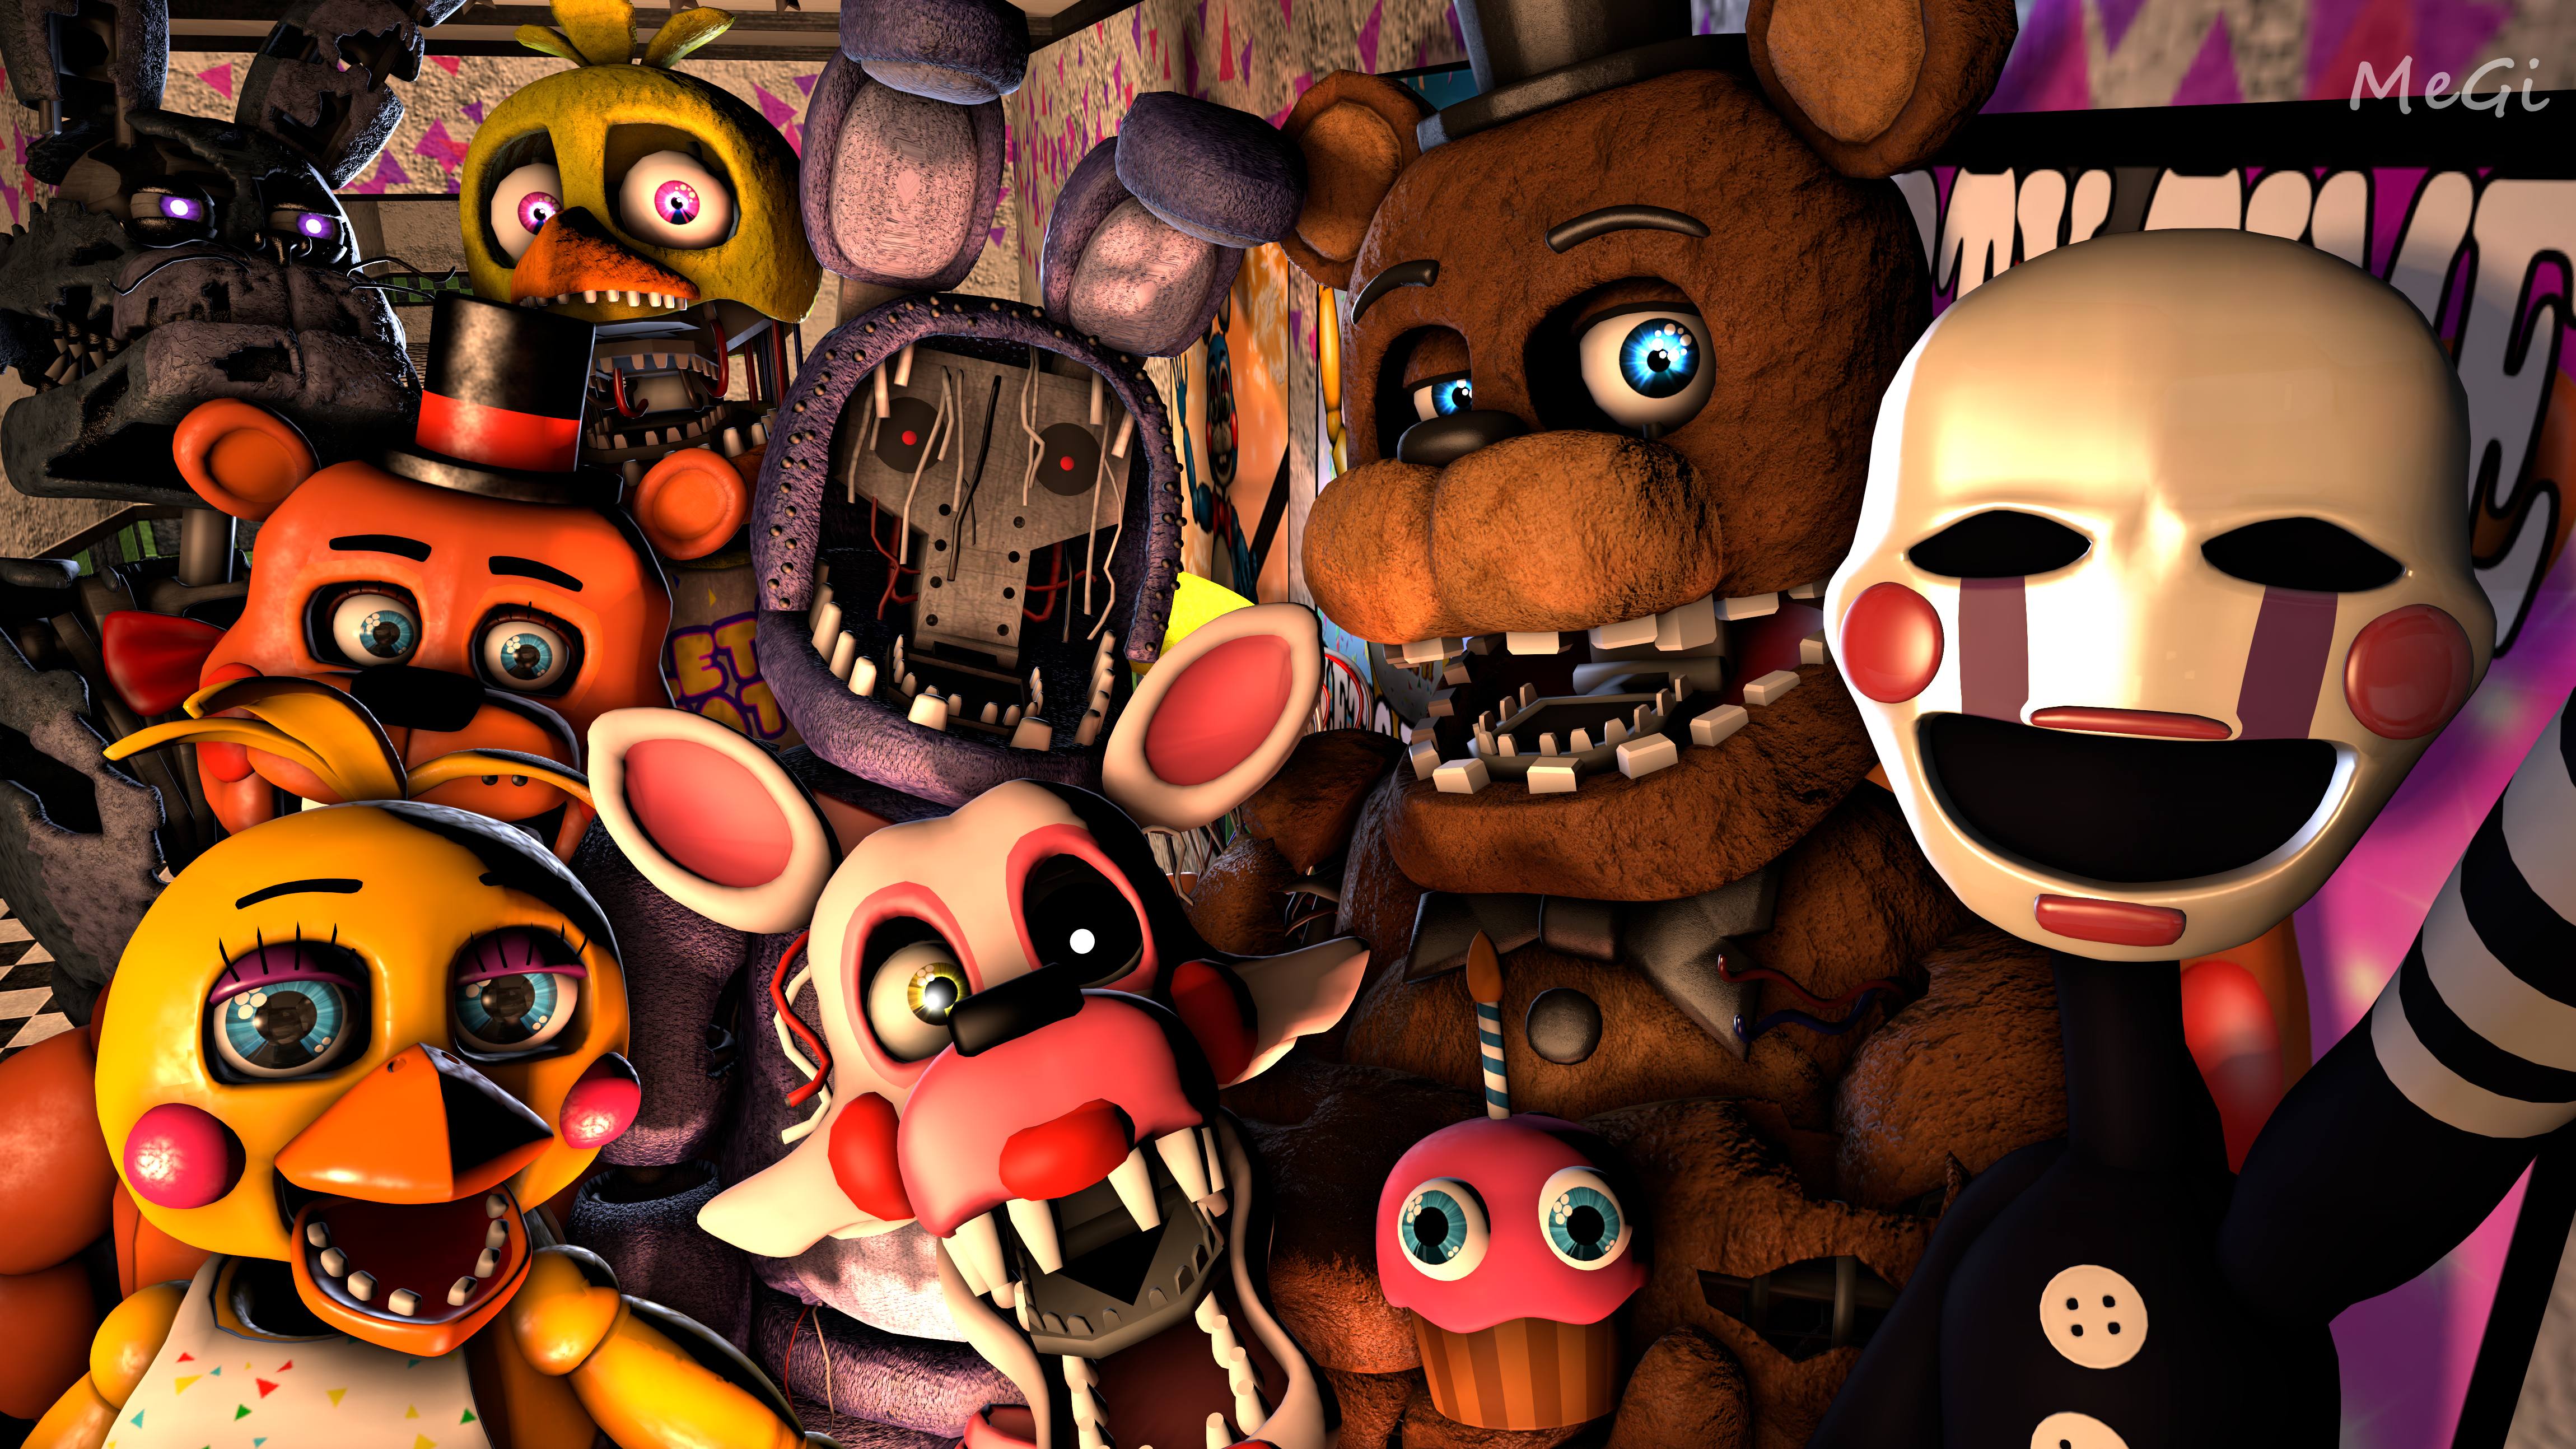 Withered Freddy, Withered Bonnie, Withered Chica, Toy Freddy, The Puppet, Me, Mangle, Carl, and Nightmare Bonnie!❤✌. Fnaf, Fnaf drawings, Five nights at freddy's